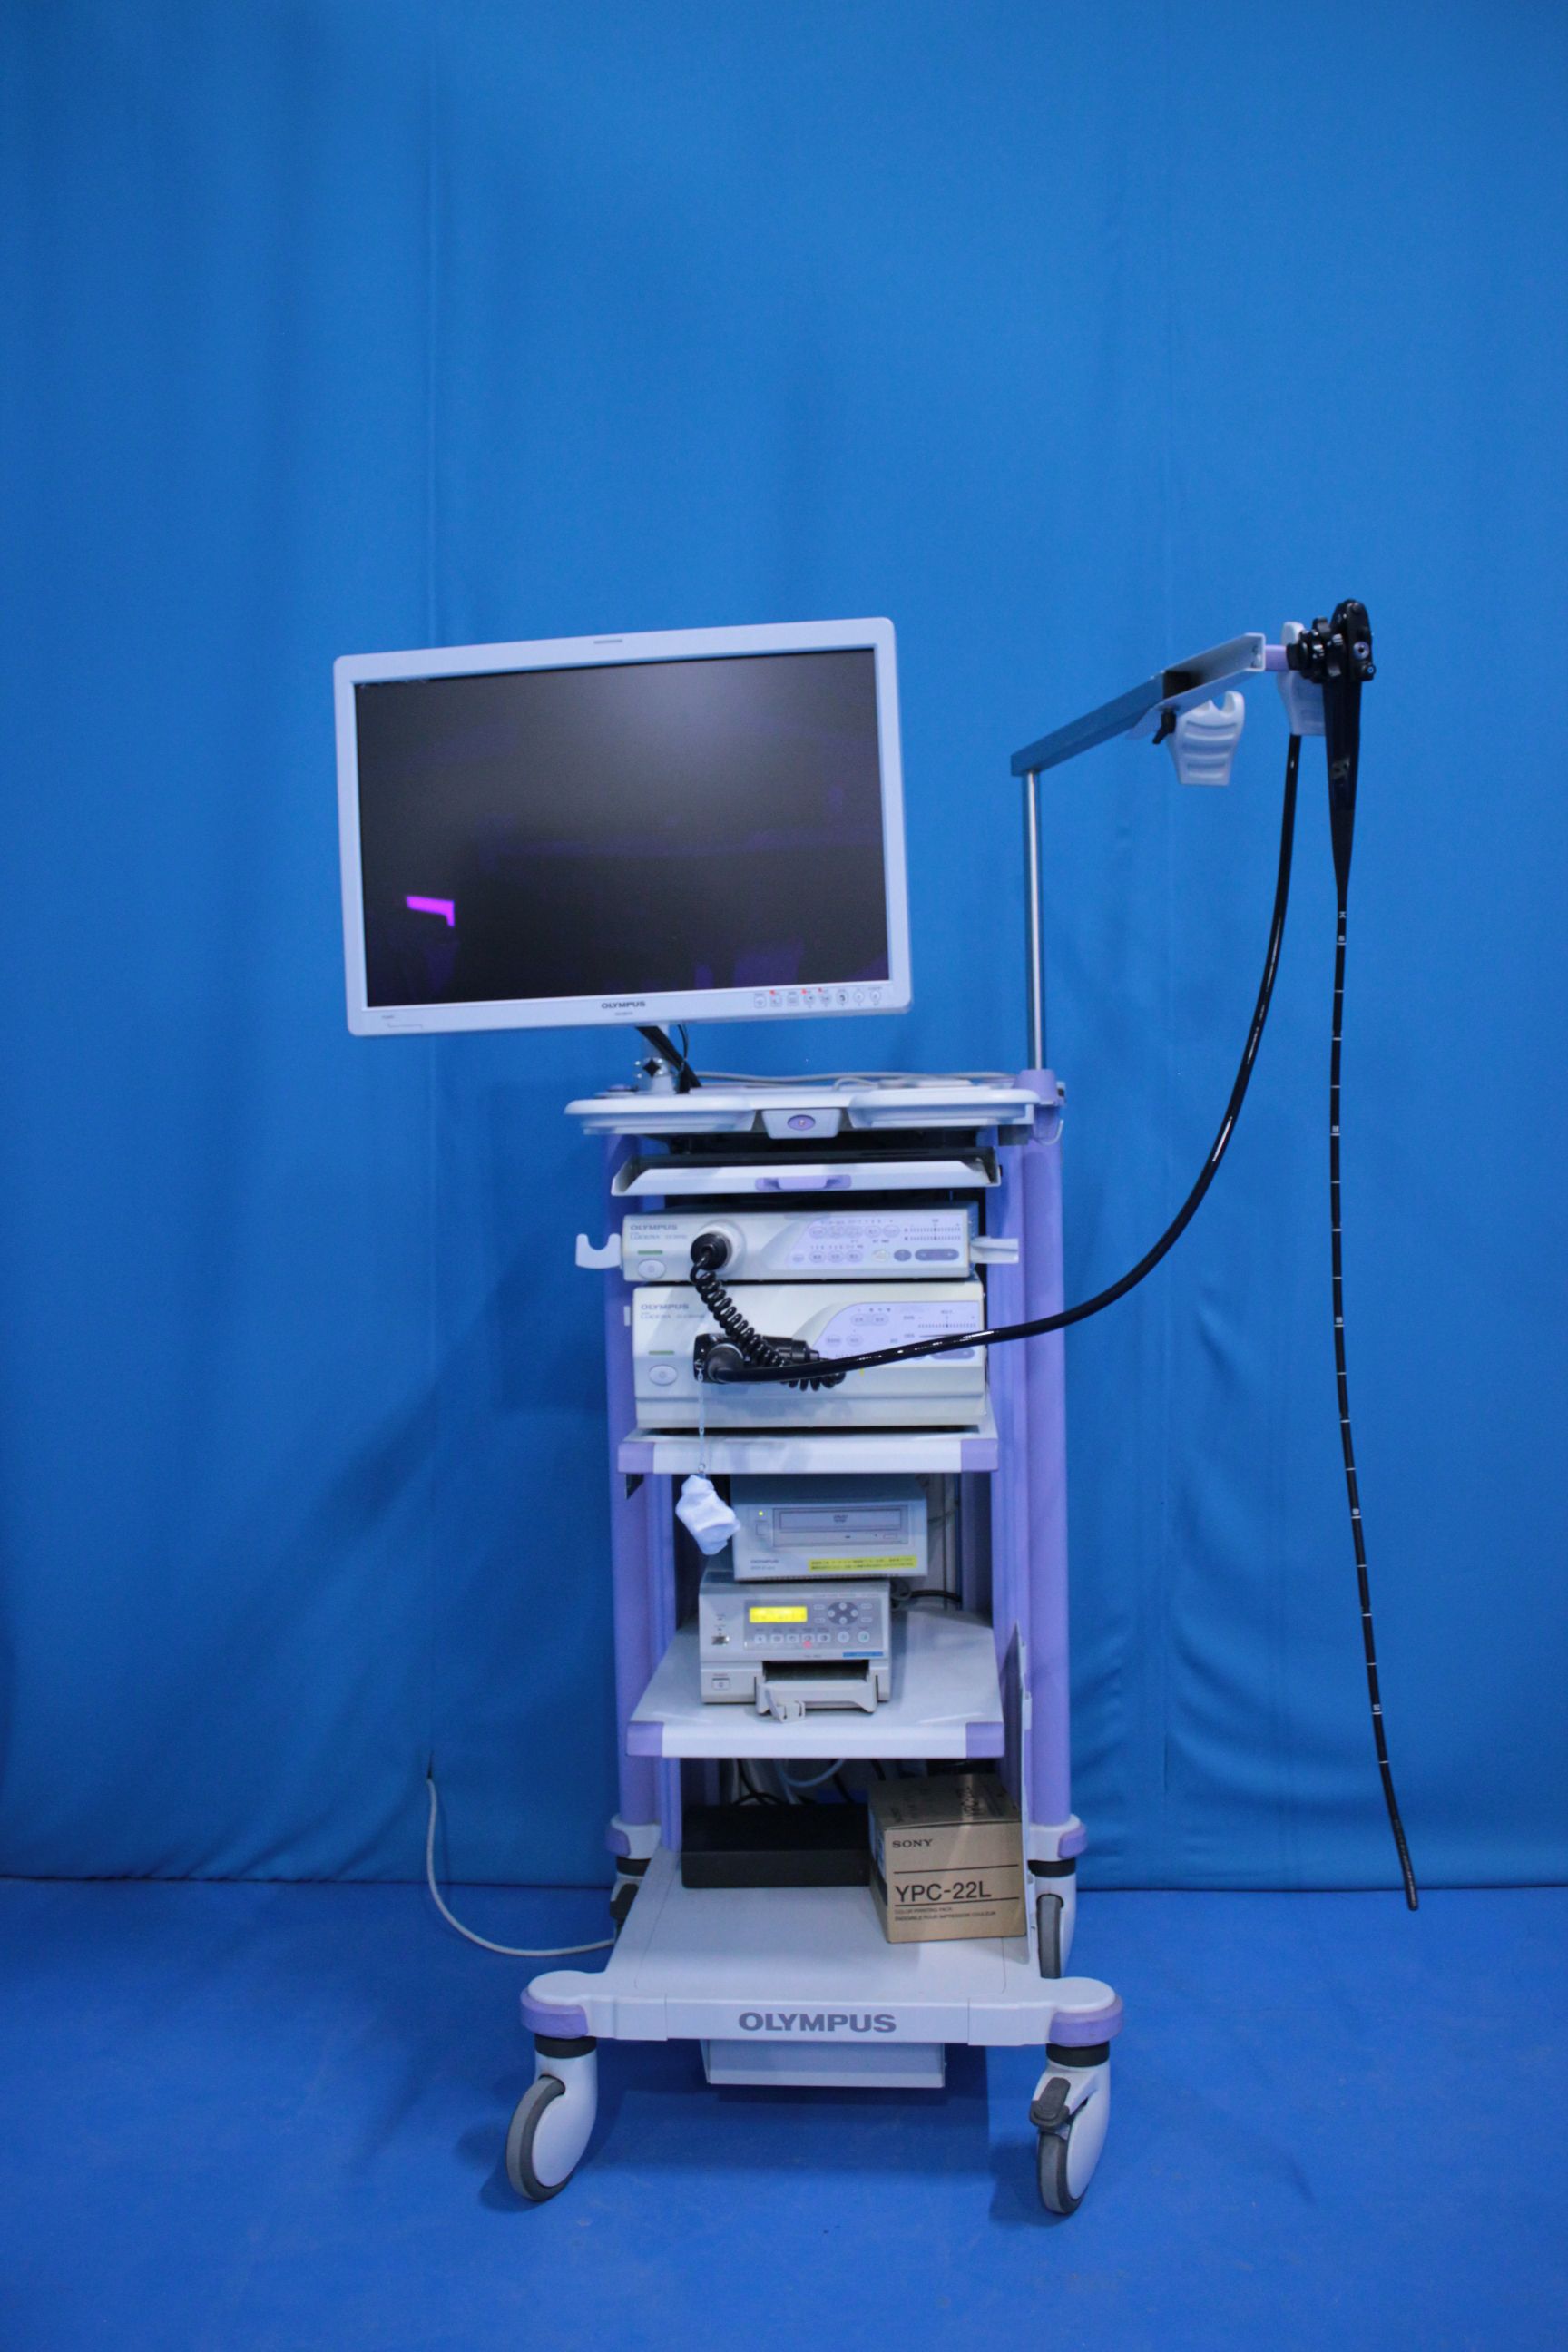 Product detail｜11404｜OLYMPUS｜Electronic endoscope system｜260 system ...